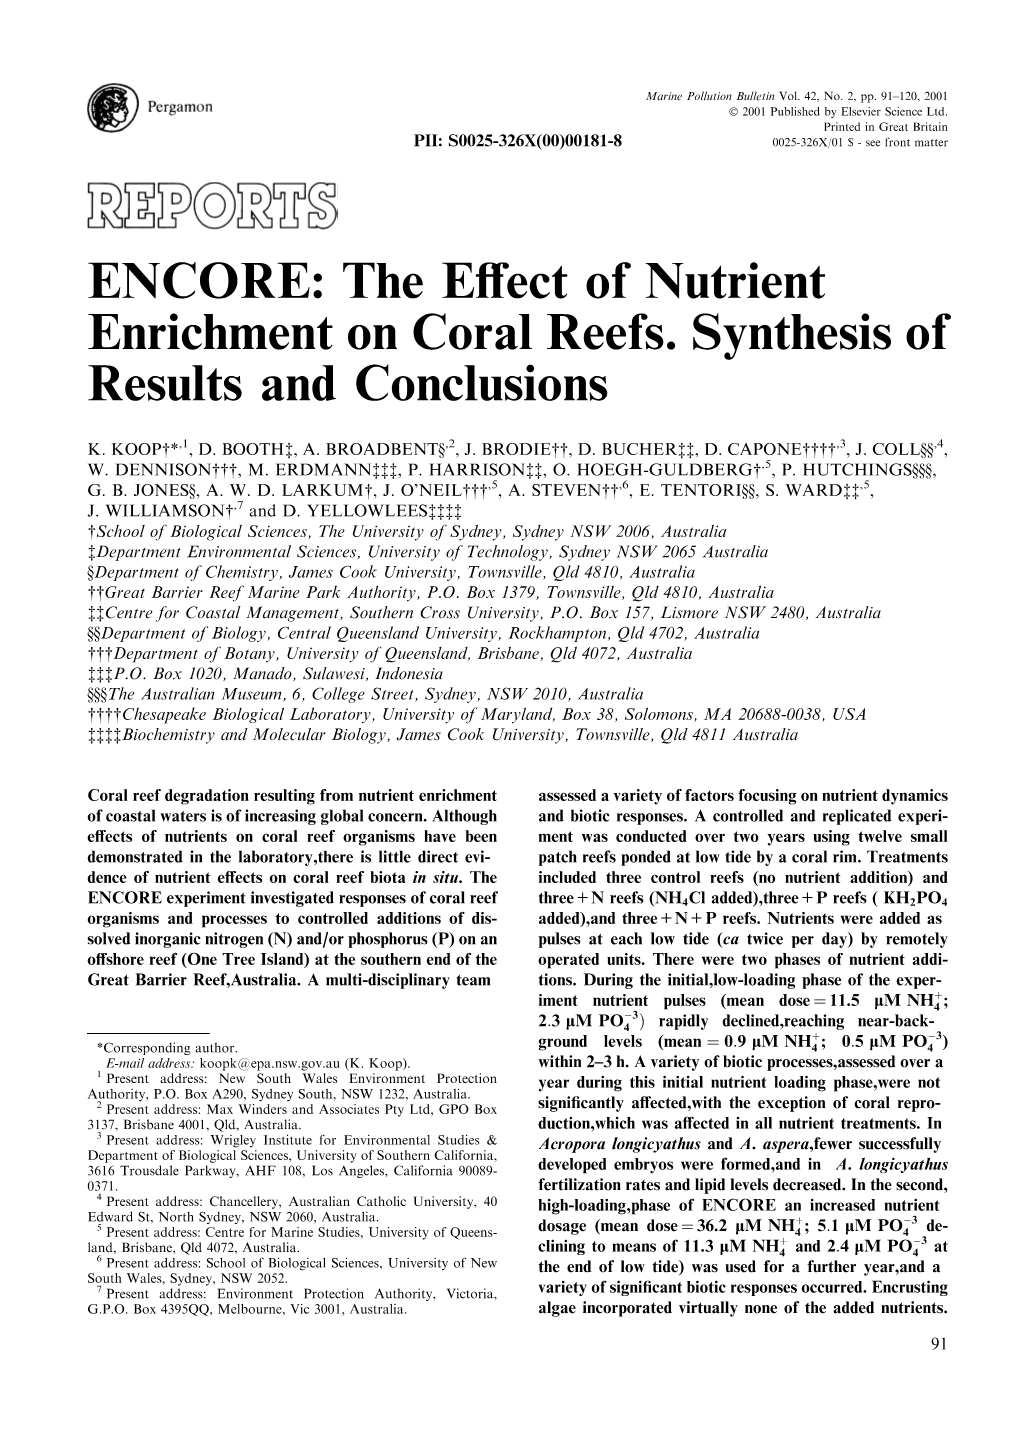 ENCORE: the Eаect of Nutrient Enrichment on Coral Reefs